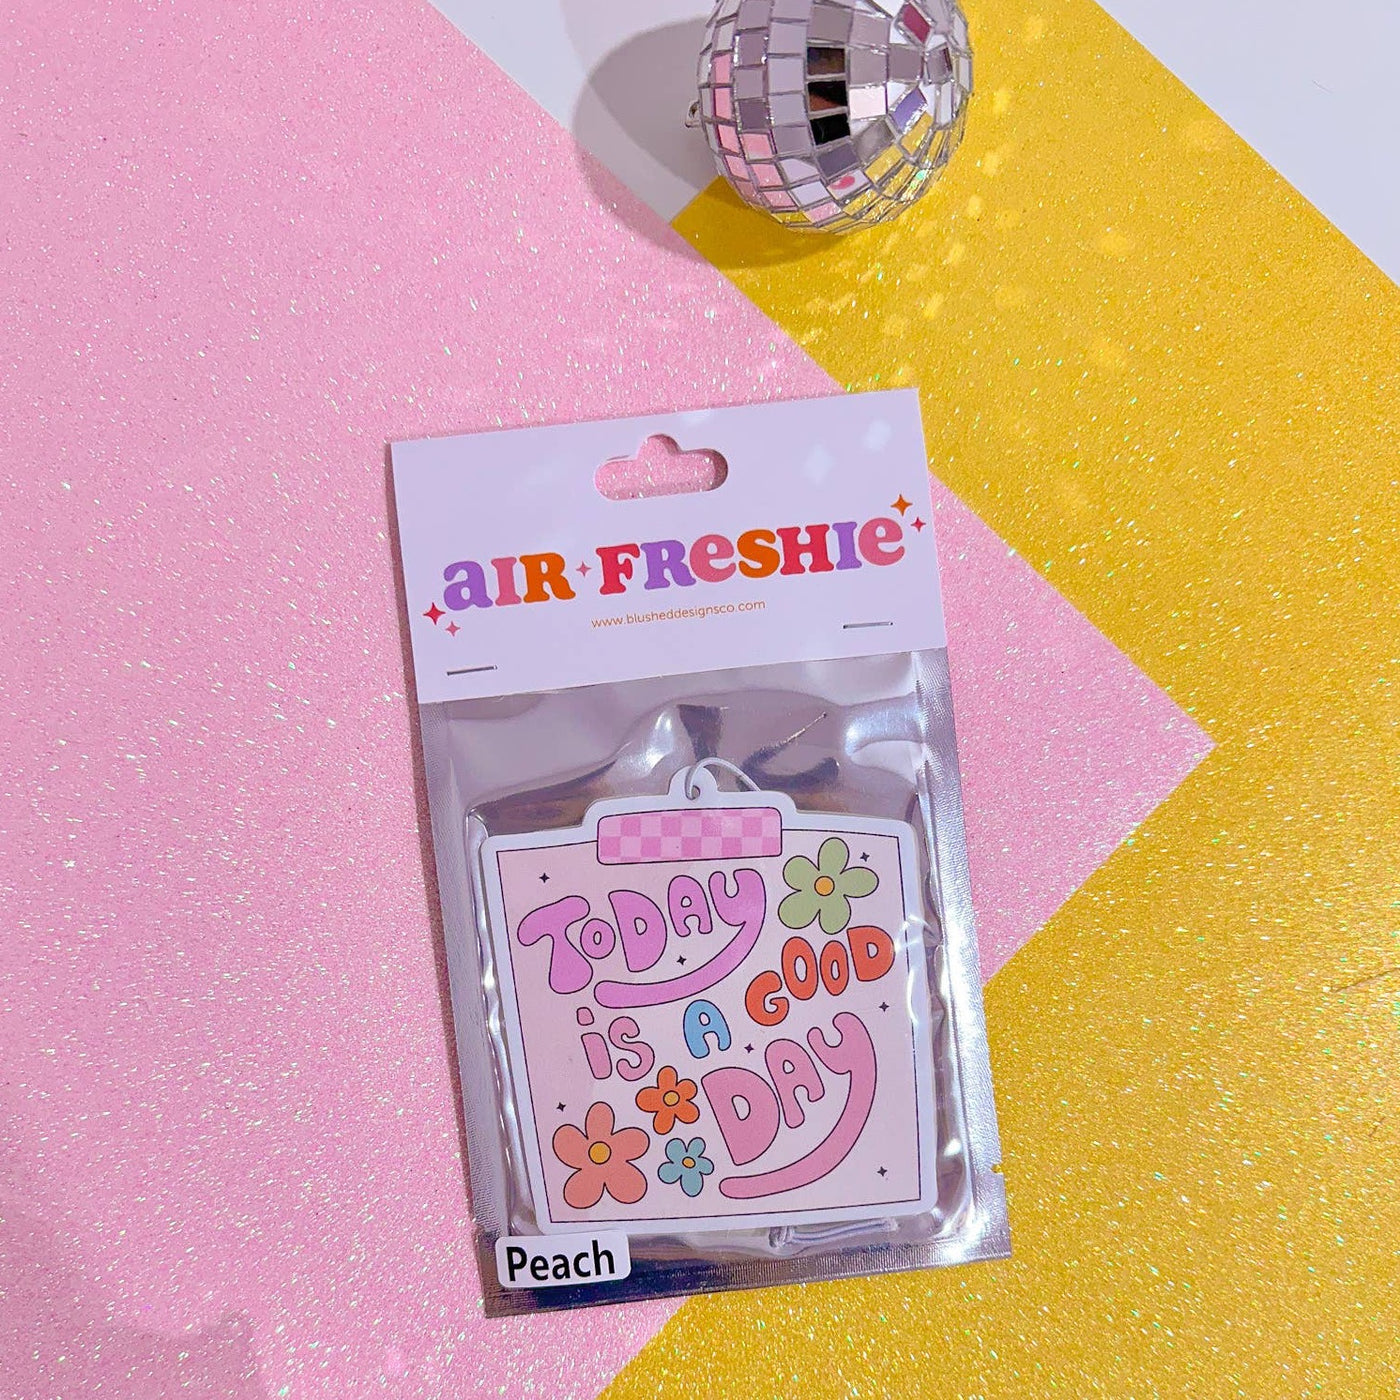 BlushedDesigns Co. - Today is a Good Day Doodle Car Air Freshener (Peach Scent) - The Local Space